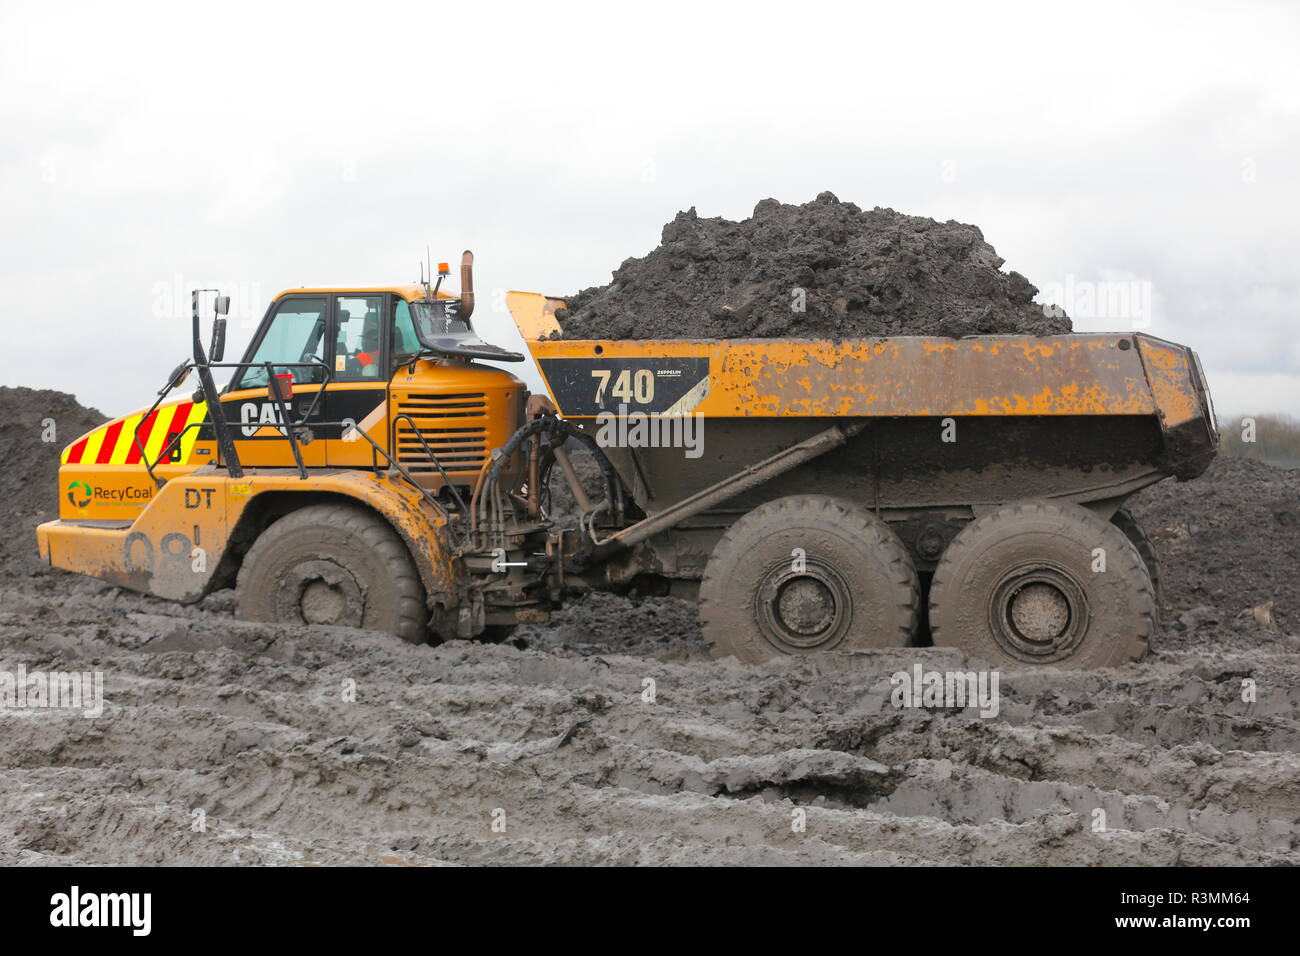 A Caterpillar 740 Articulated Dump Truck working on site at Recycoal Coal Recycling Plant in Rossington,Doncaster which has now been demolished. Stock Photo